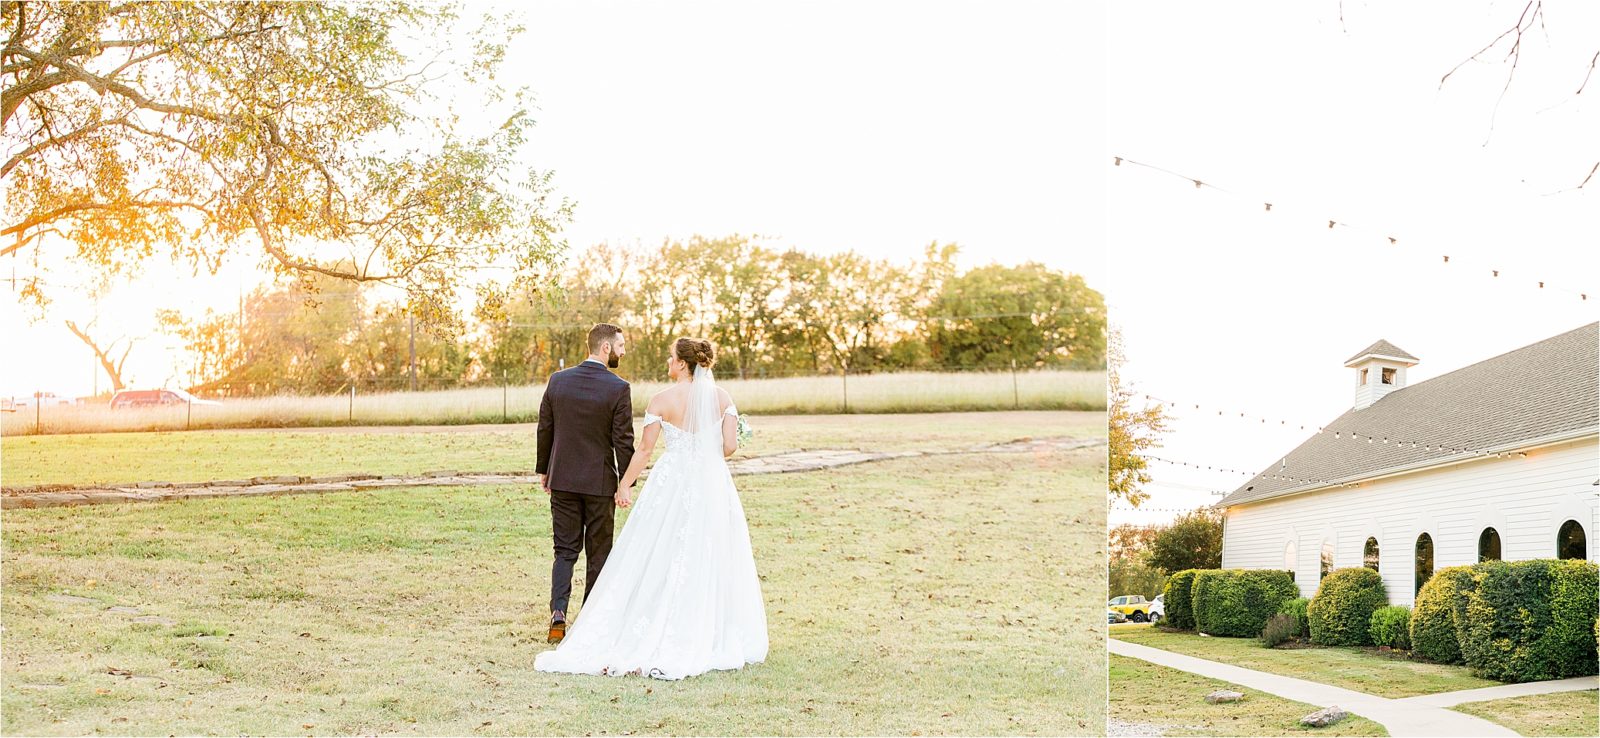 A newlywed couple holds hands and walks into the sunset during their wedding portraits at Rustic Grace Estate near McKinney, TX 